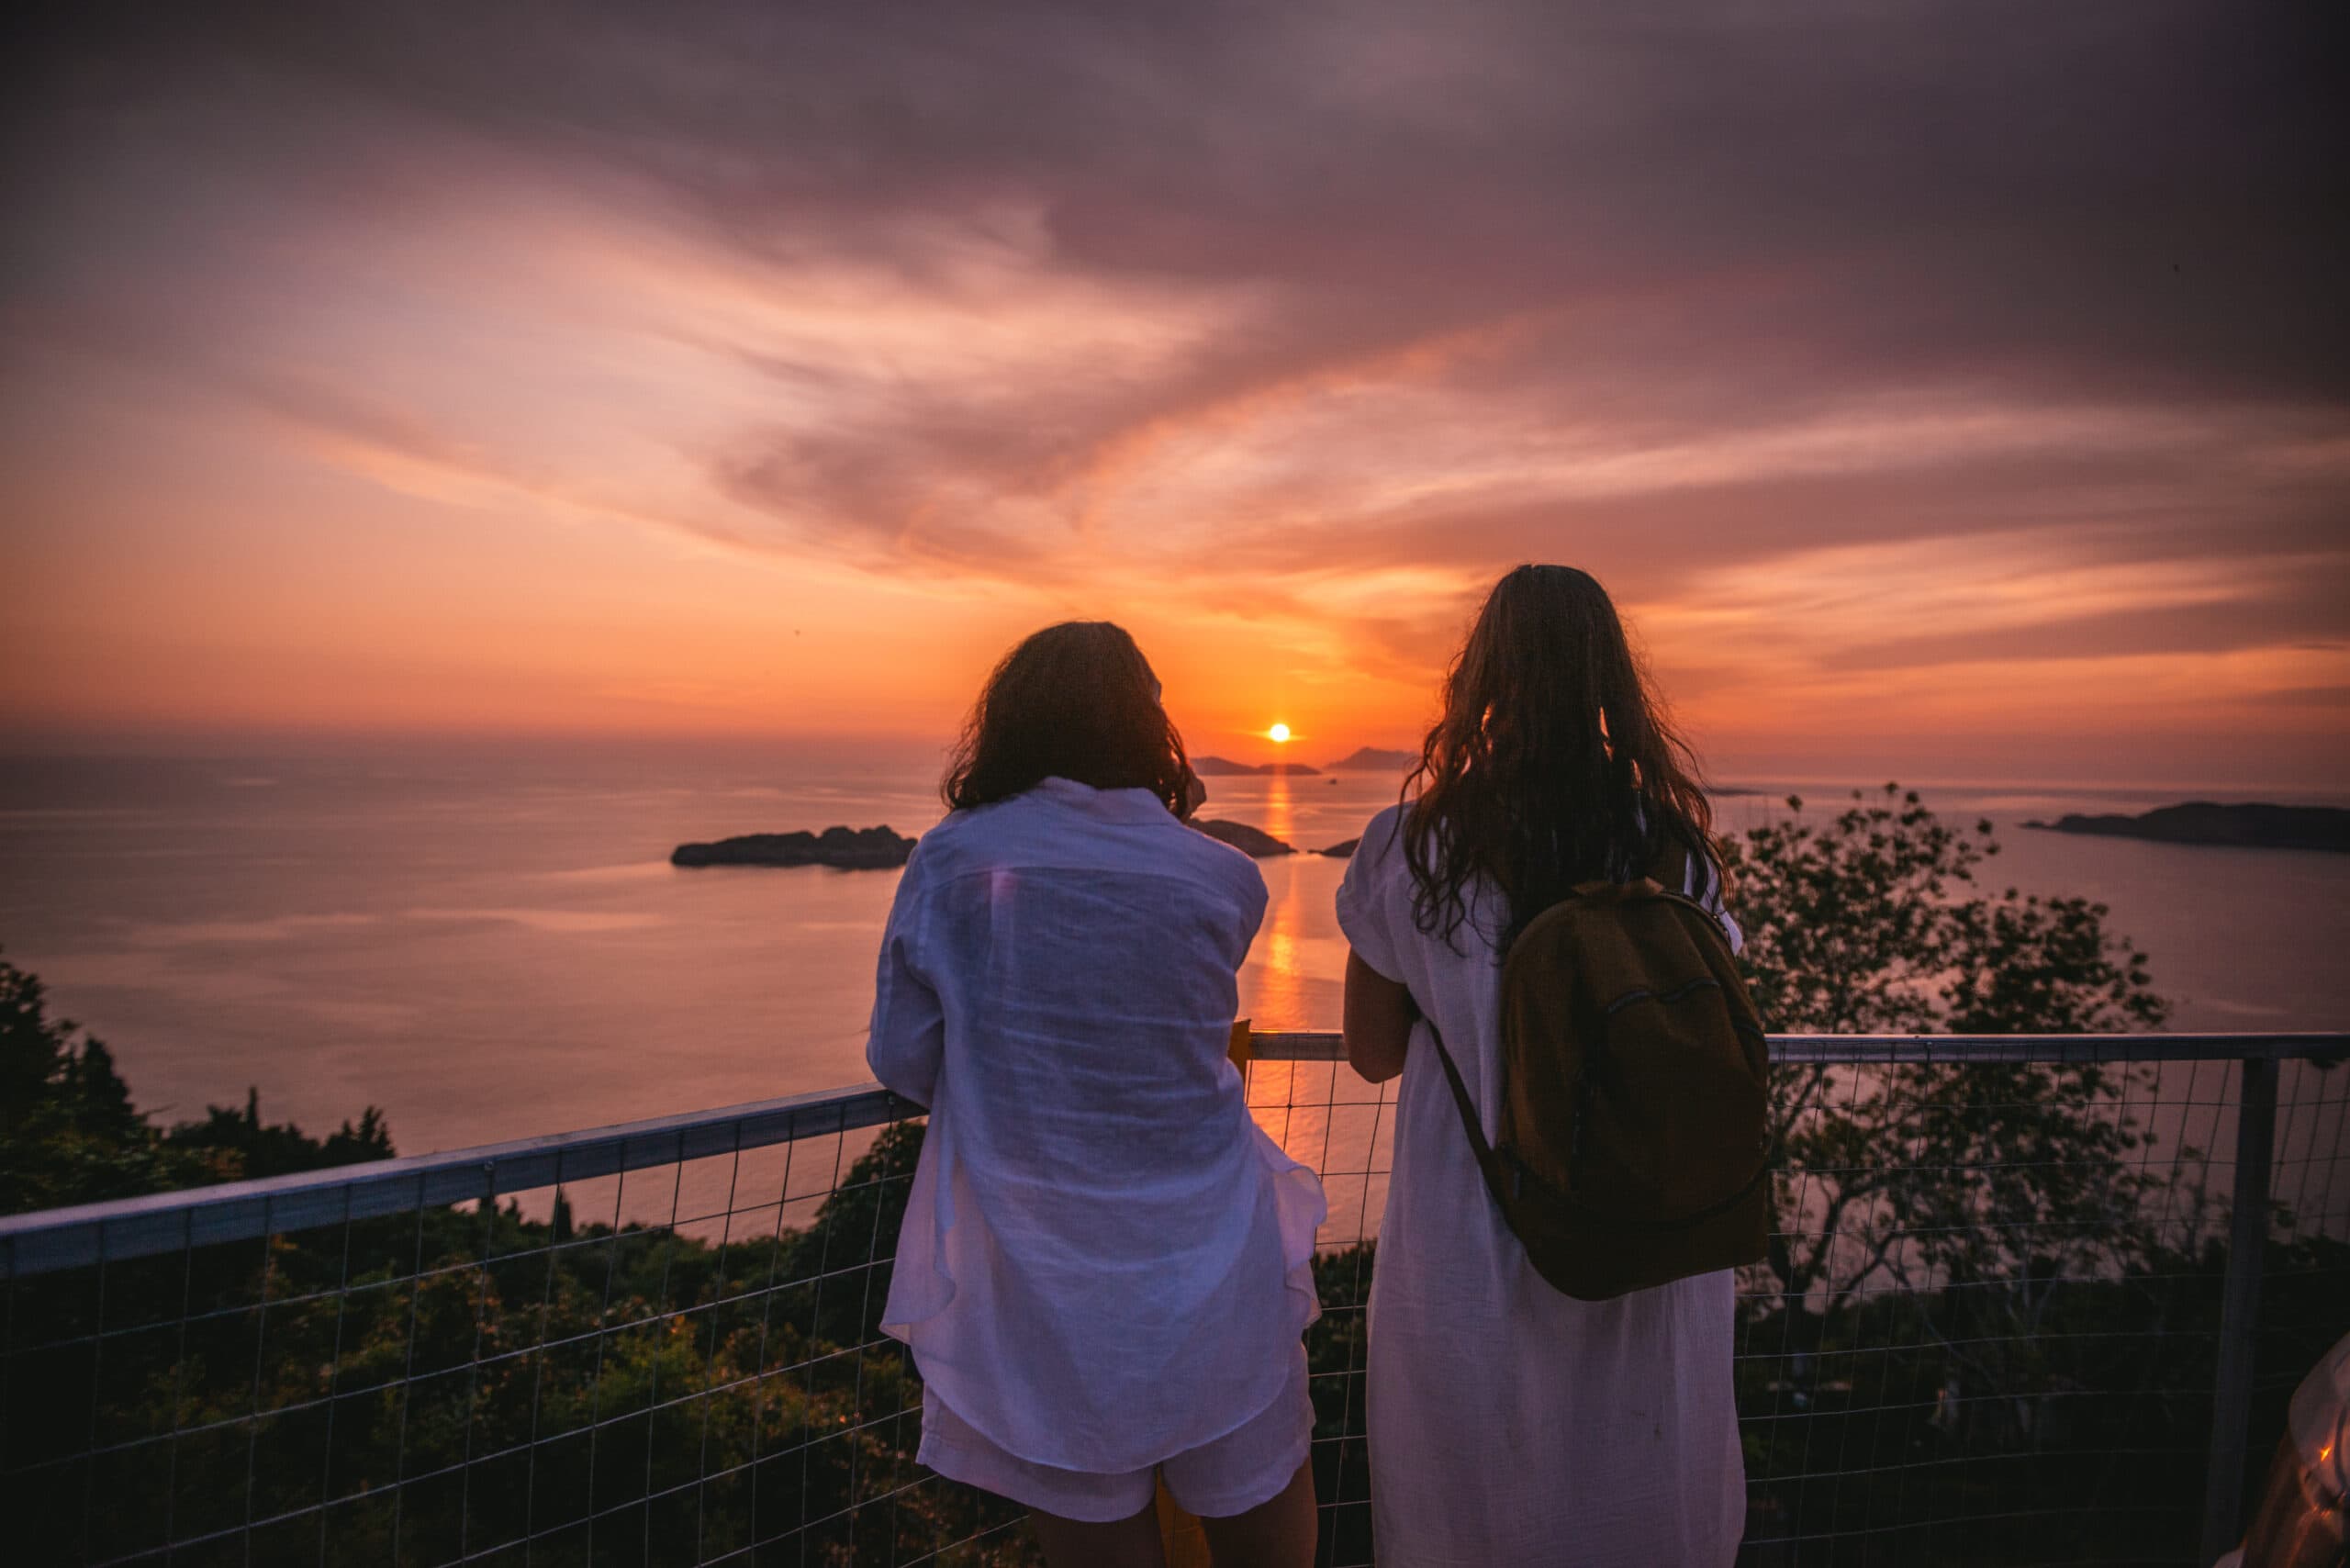 Brides gazing at the mesmerizing sunset, a shared moment of tranquility during their Corfu elopement.